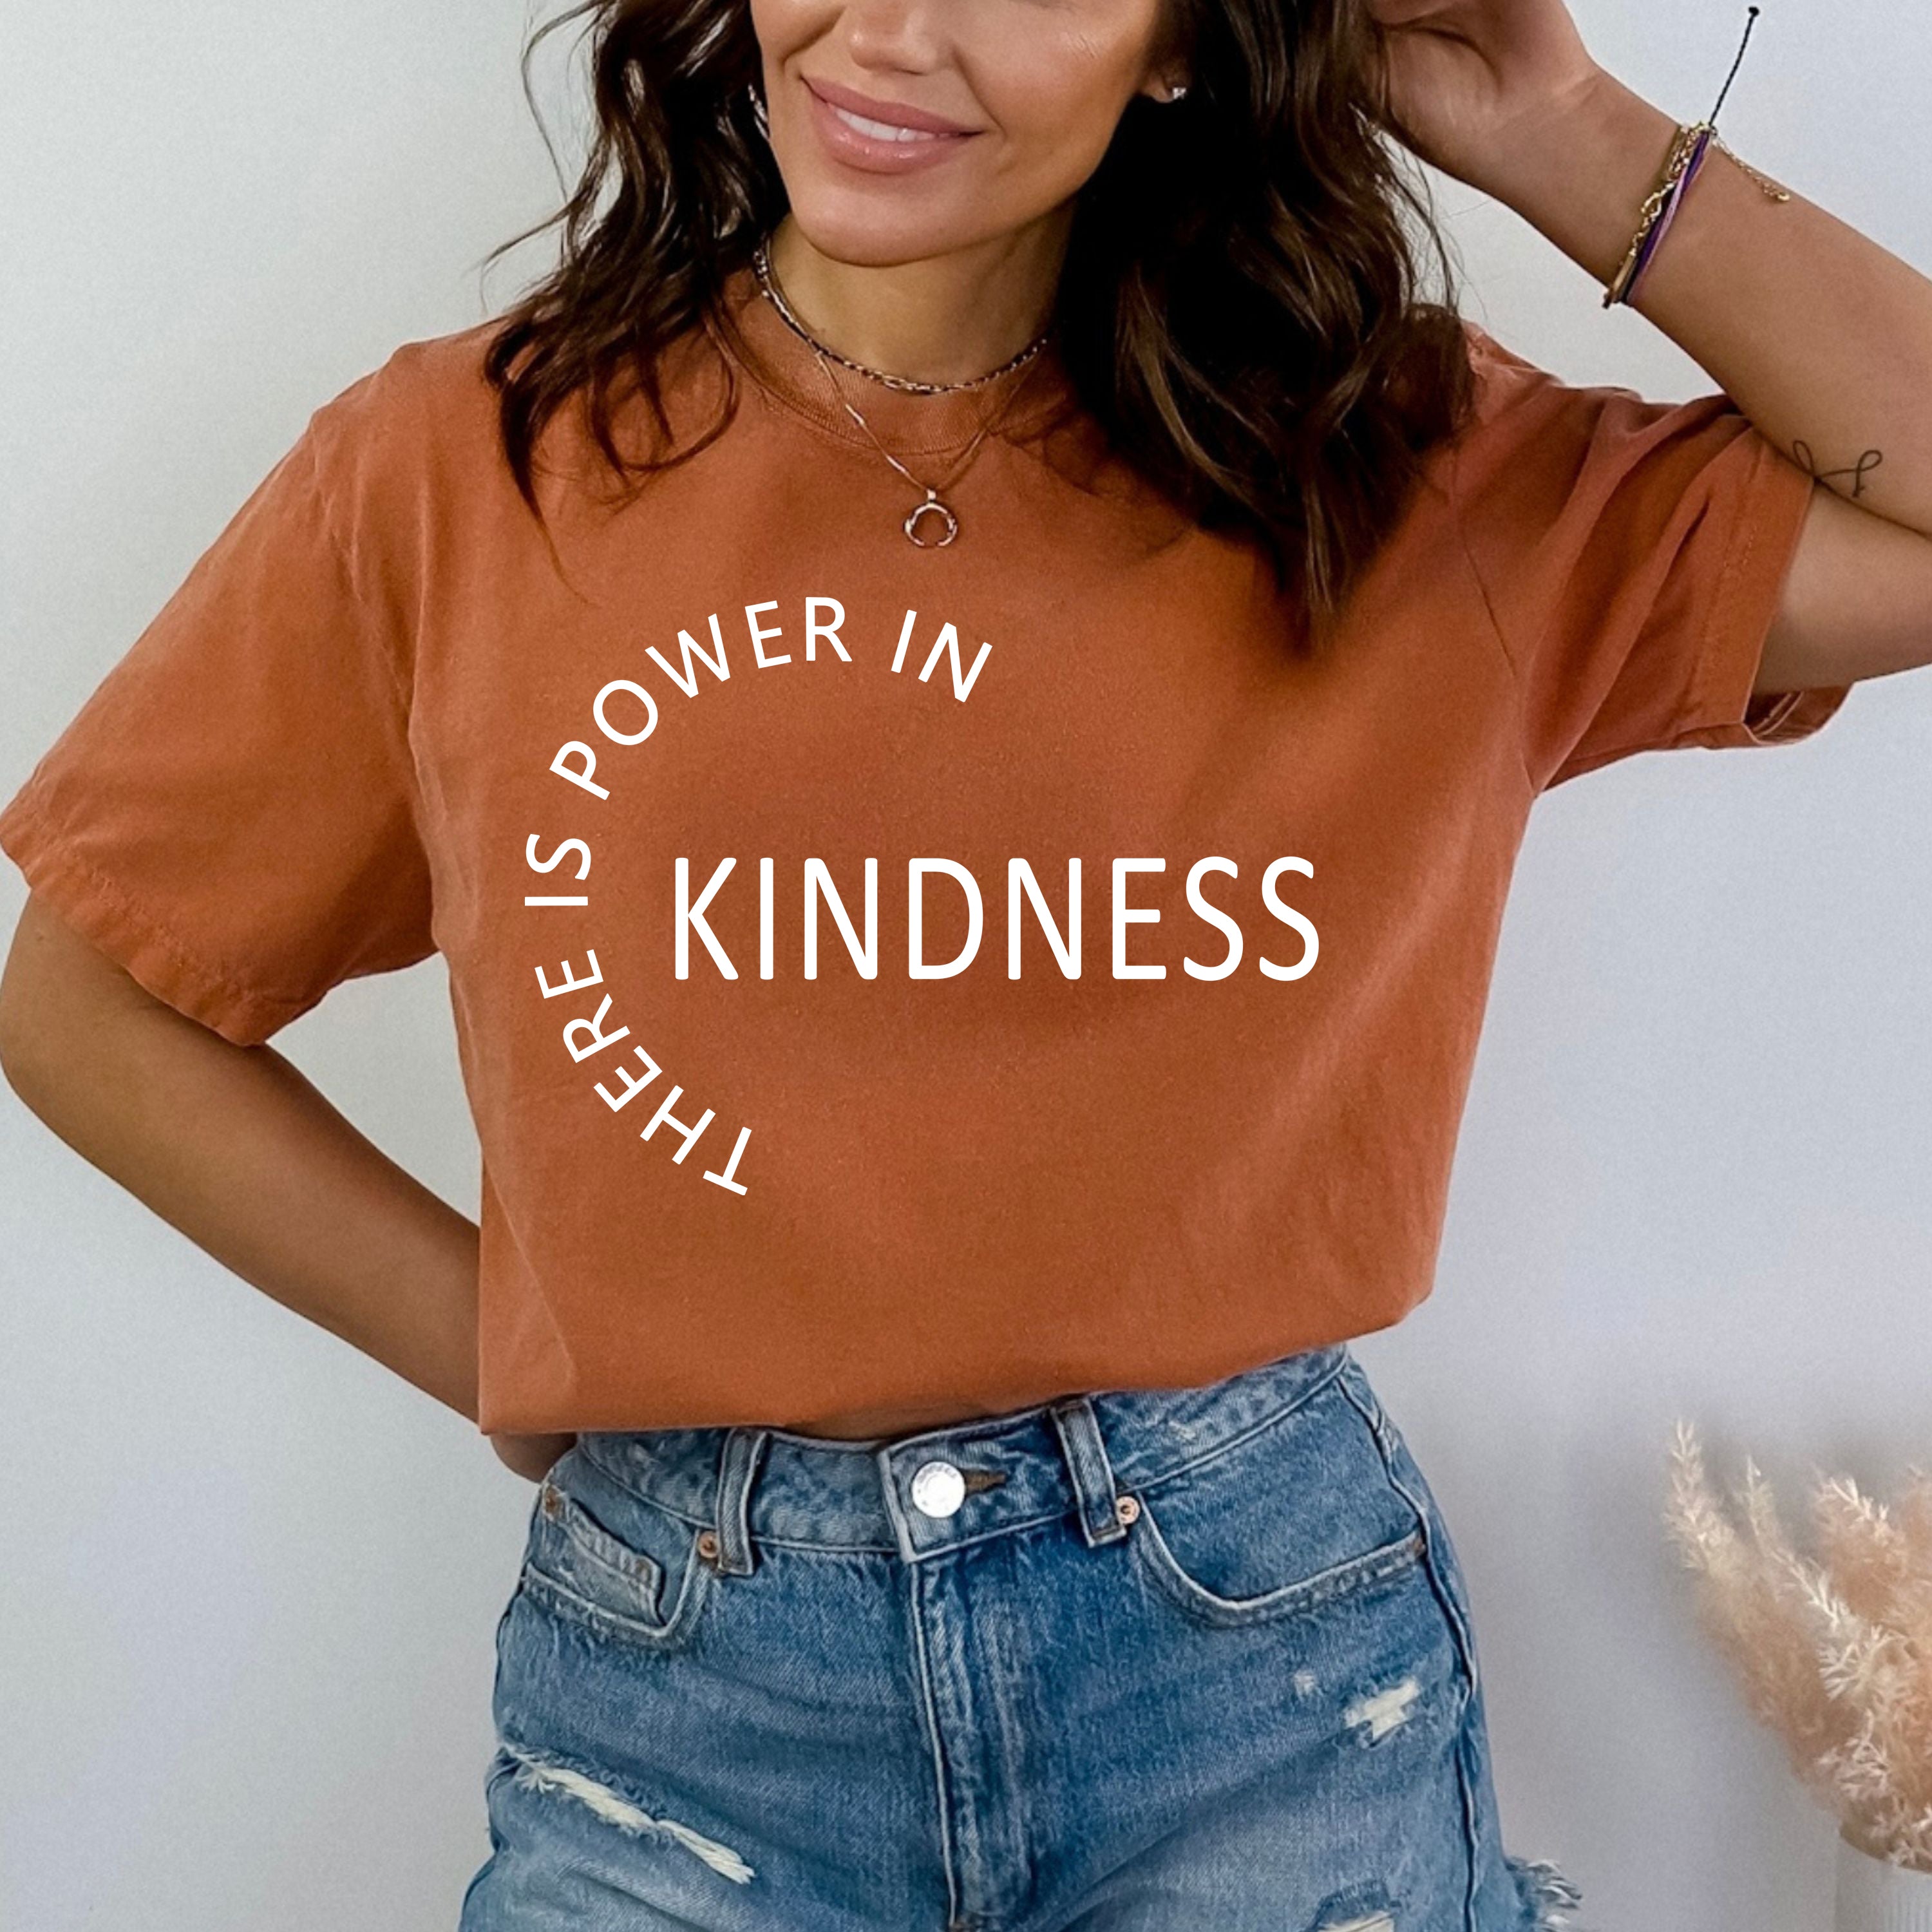 There Is Power In Kindness - Bella Canvas